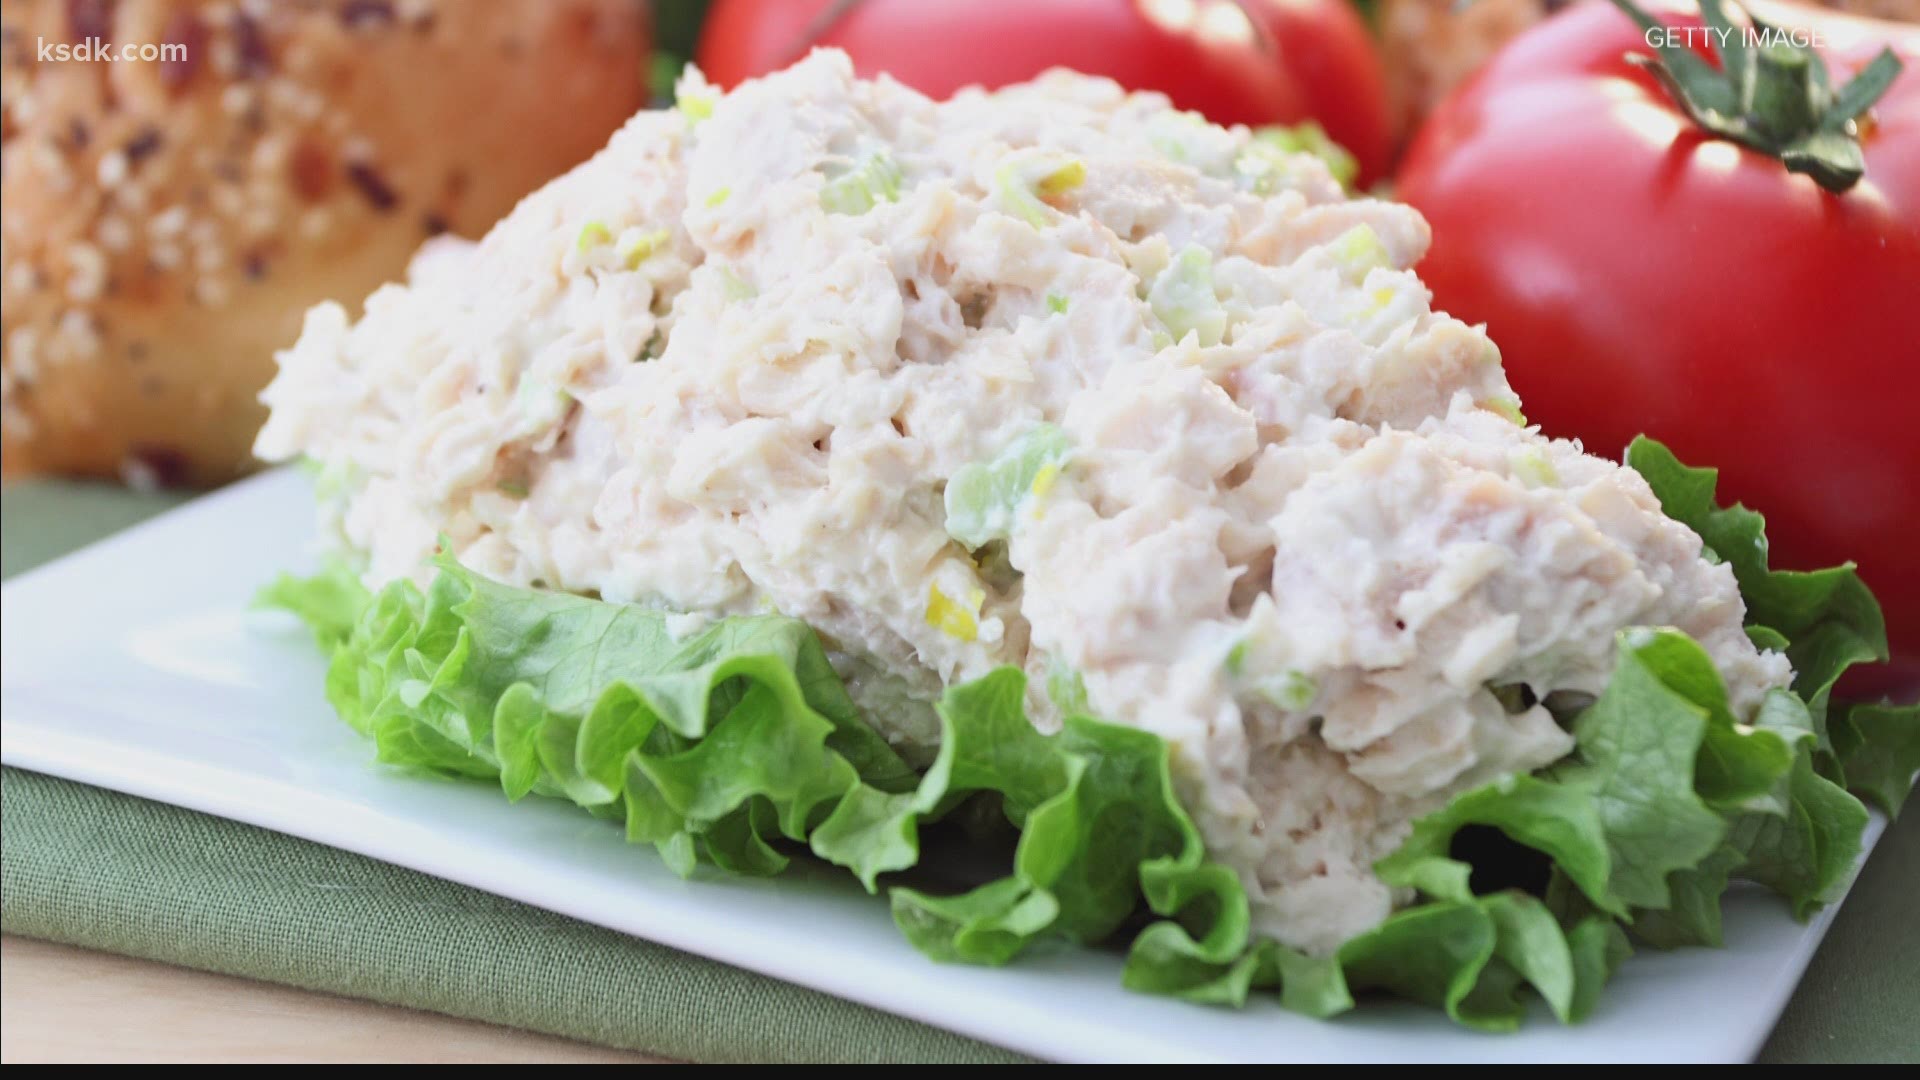 It's known for its daily offering of a dozen varieties of made-from-scratch chicken salad, as well as salads, soups, sandwiches and desserts.